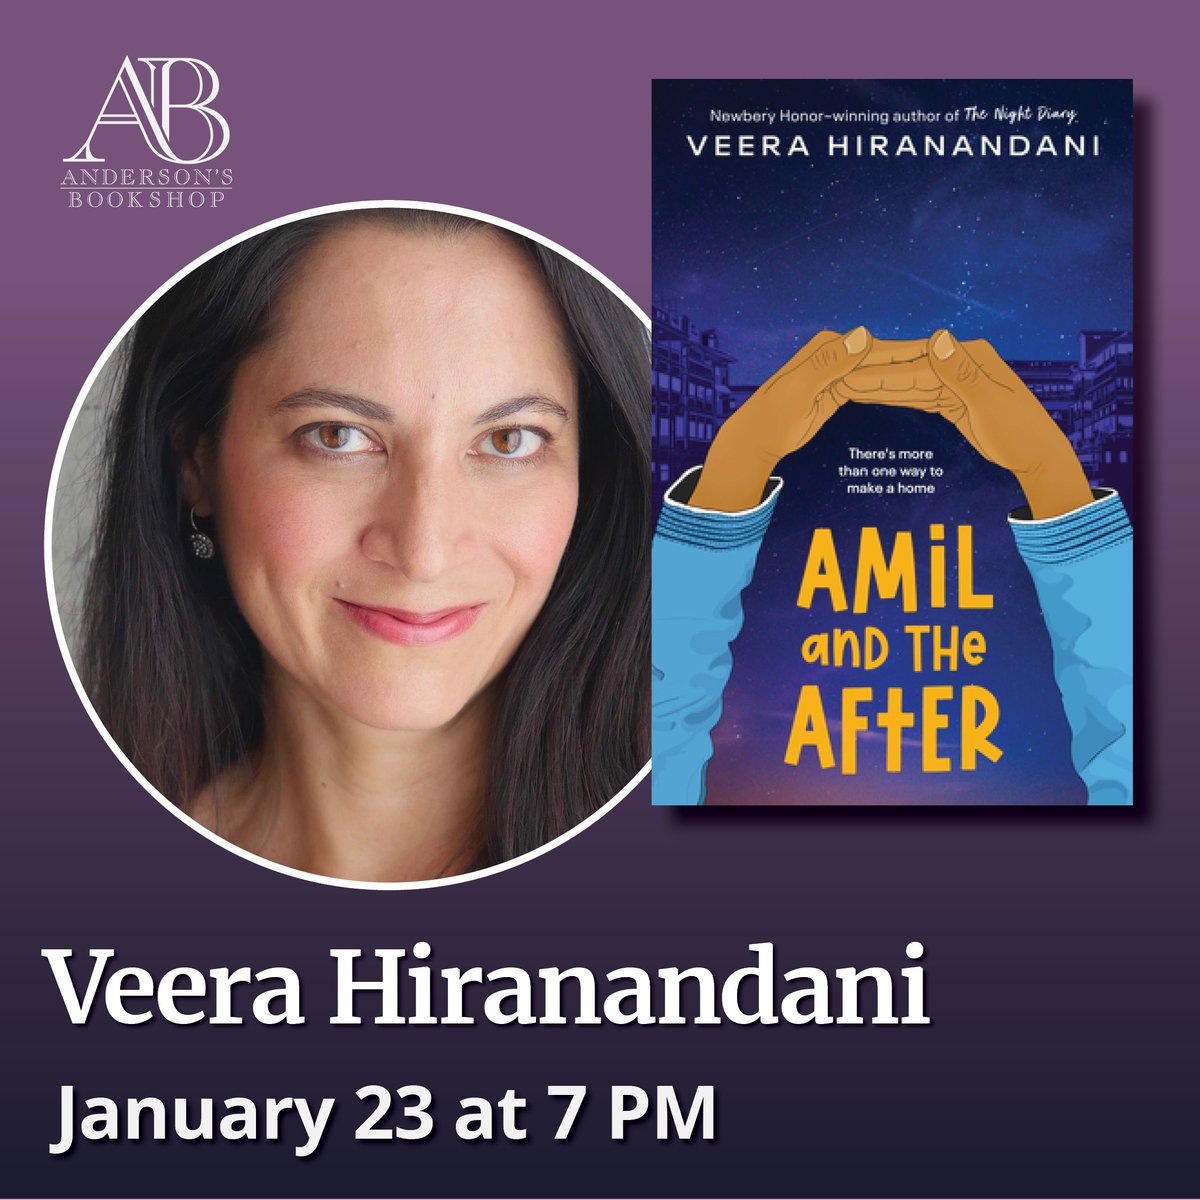 1/23: An in-person event w/ Veera Hiranandani to celebrate the release of Amil and the After on Tuesday, January 23rd at 7pm in Naperville. An author presentation, audience Q&A, and signing/photo line! Pre-registration is required as space is limited: …raHiranandaniAndersons.eventcombo.com